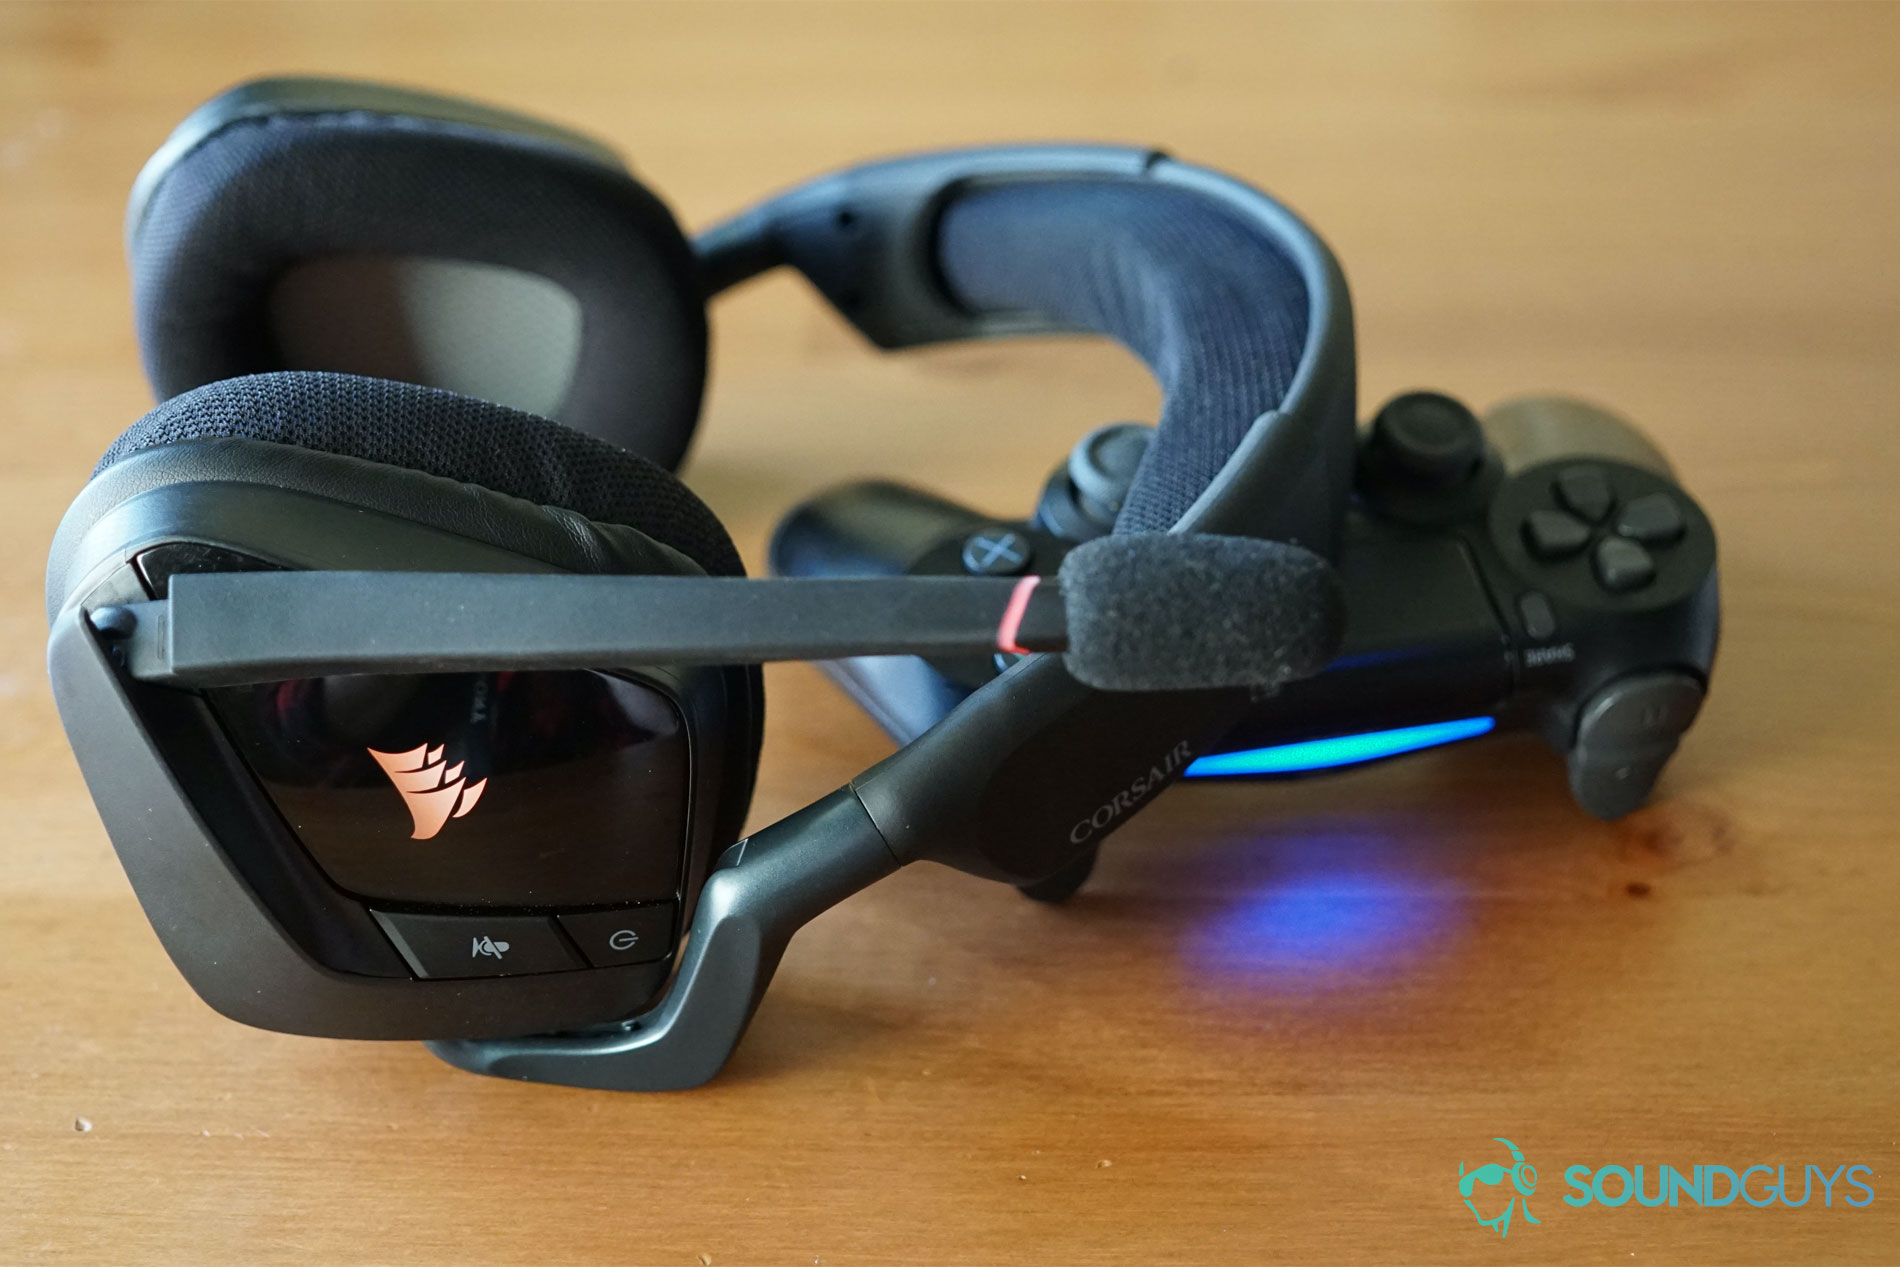 The Corsair Void RGB Elite Wireless Gaming headset lies on top of a PlayStation 4 DualShock controller on a wooden surface.